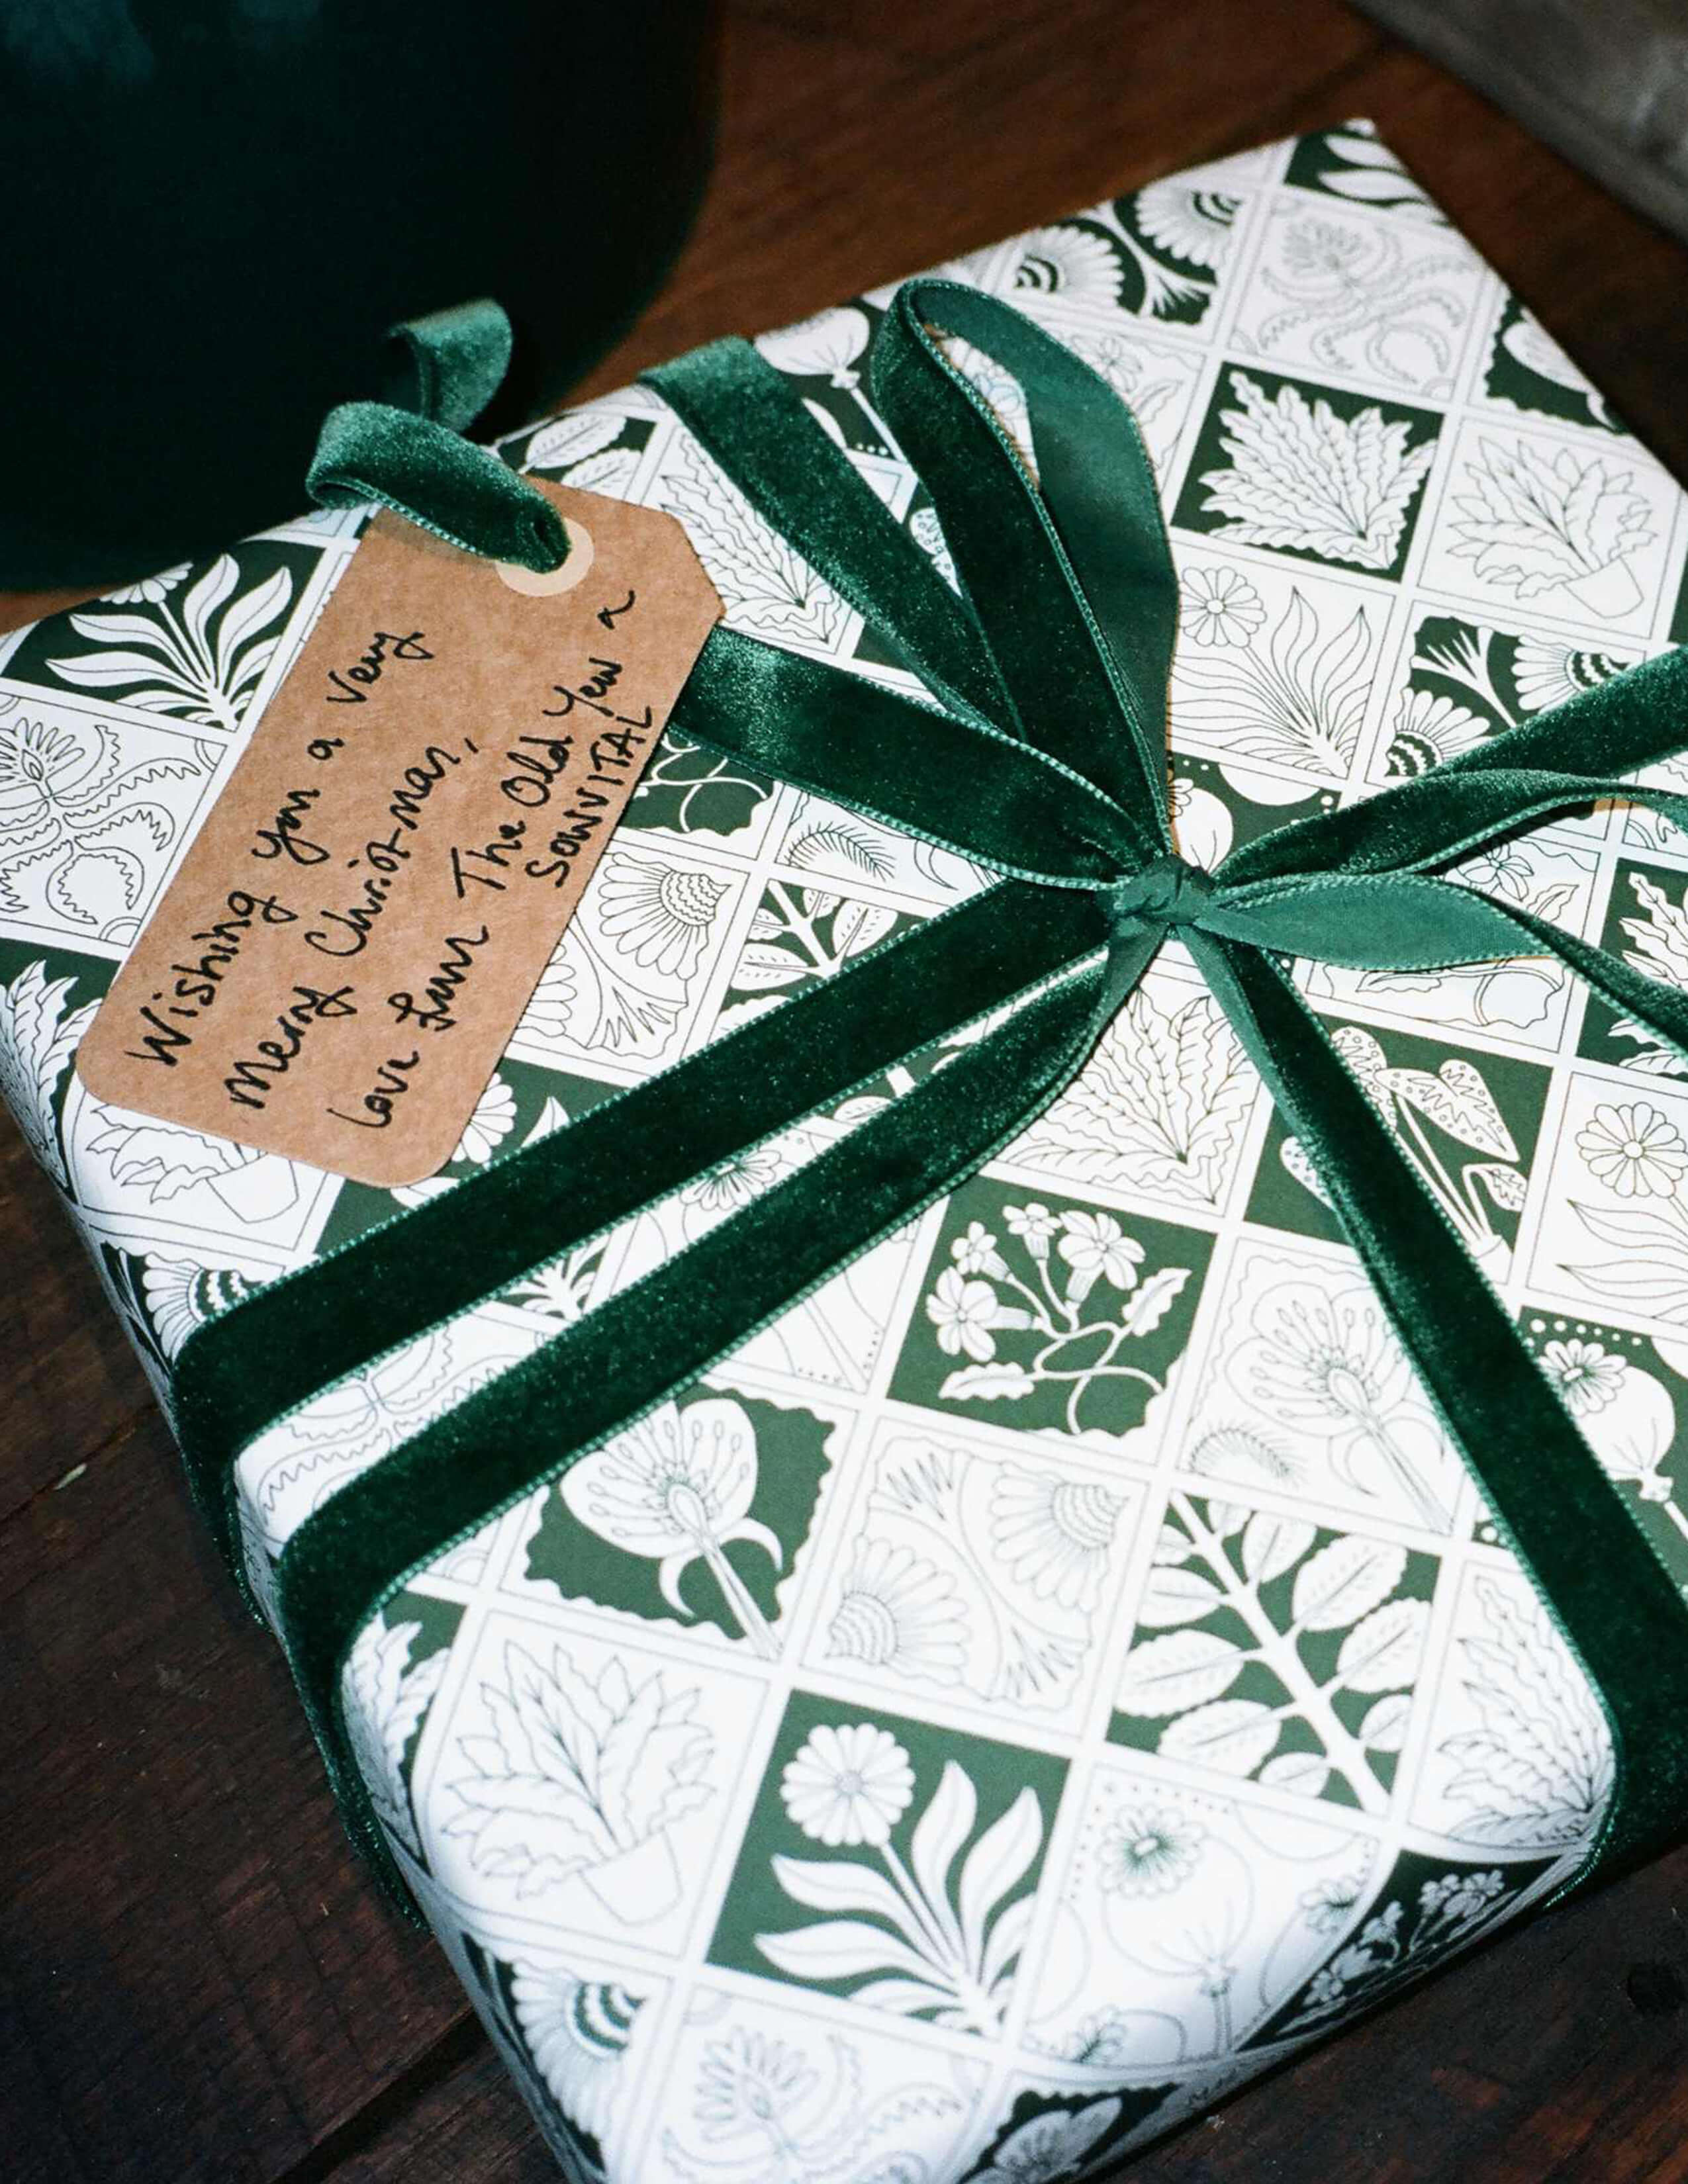 A Christmas gift with the Sowvital-designed wrapping paper and a name tag card.